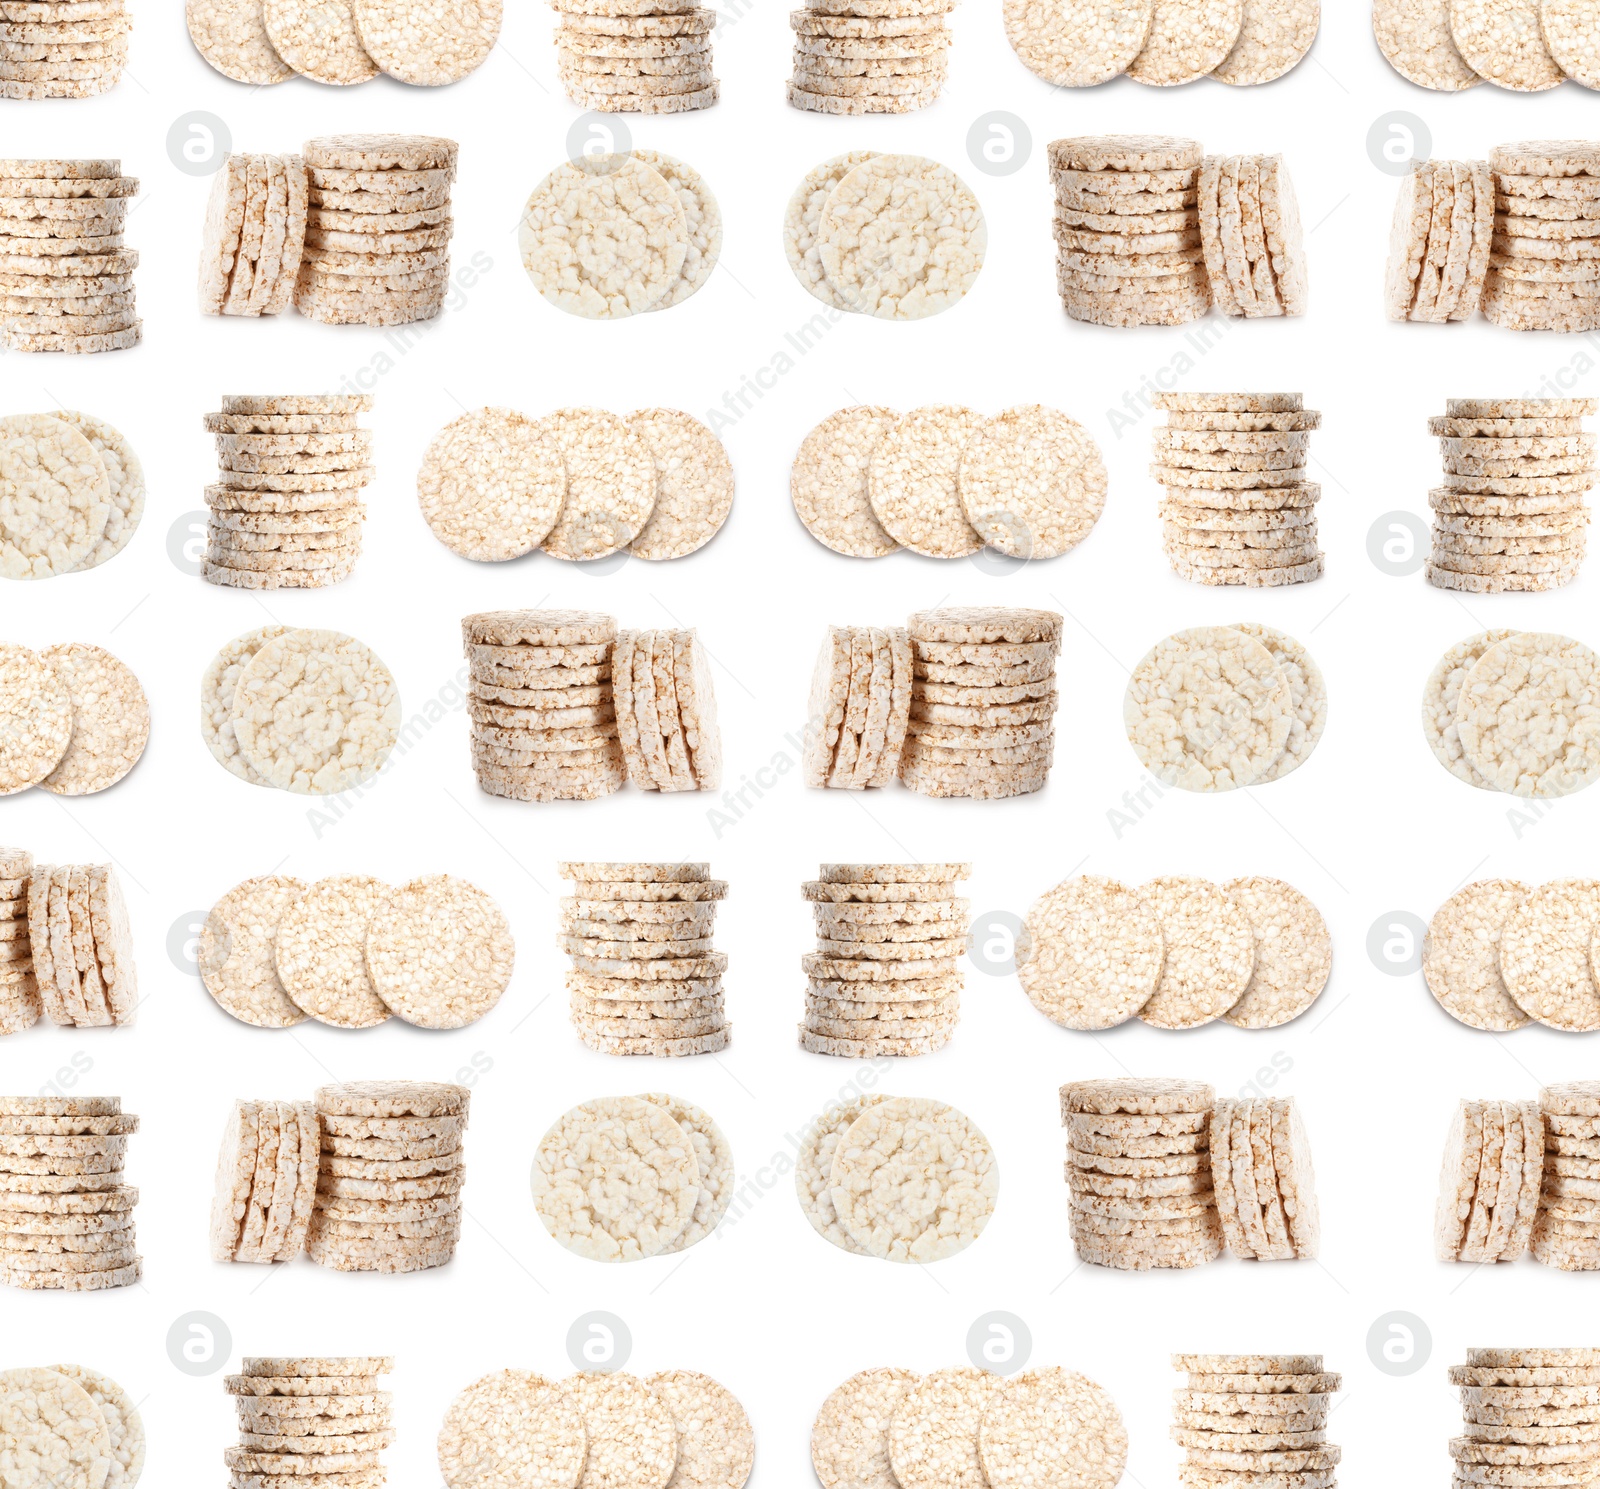 Image of Set of puffed corn cakes on white background. Pattern design